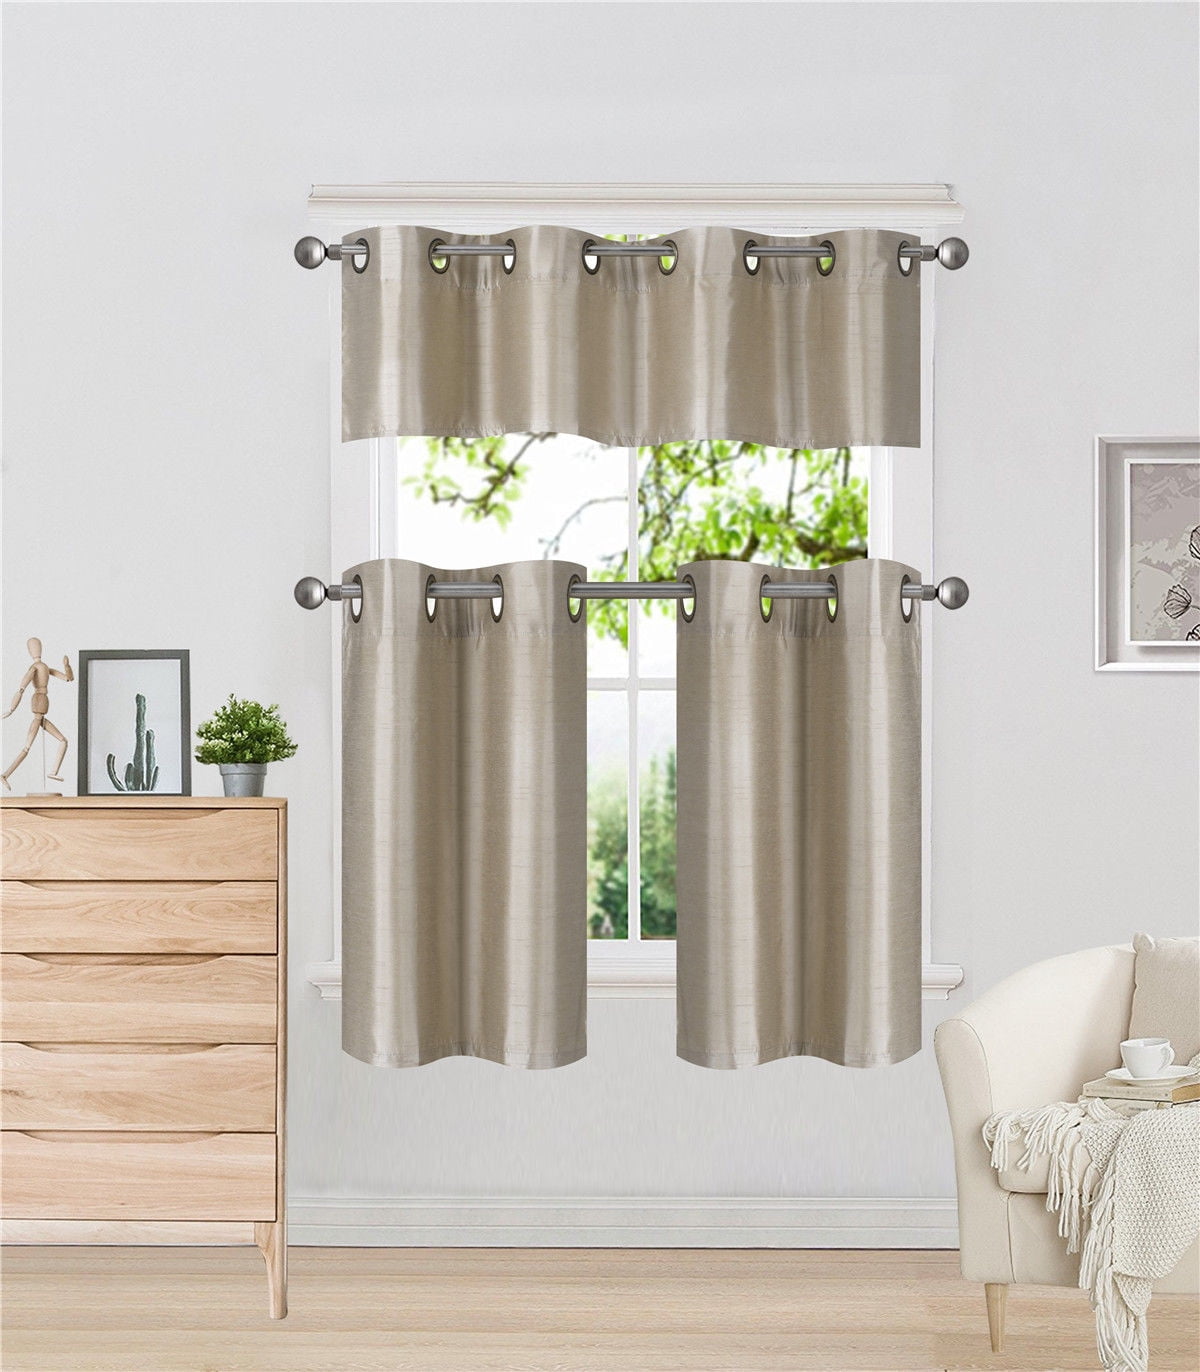 Short Kitchen Curtain LIOOBO Window Curtain Valance Blackout Thermal Insulated Valance Curtain ï¼ˆ52 W x 18 Hï¼‰ Small Cabinet Curtains 